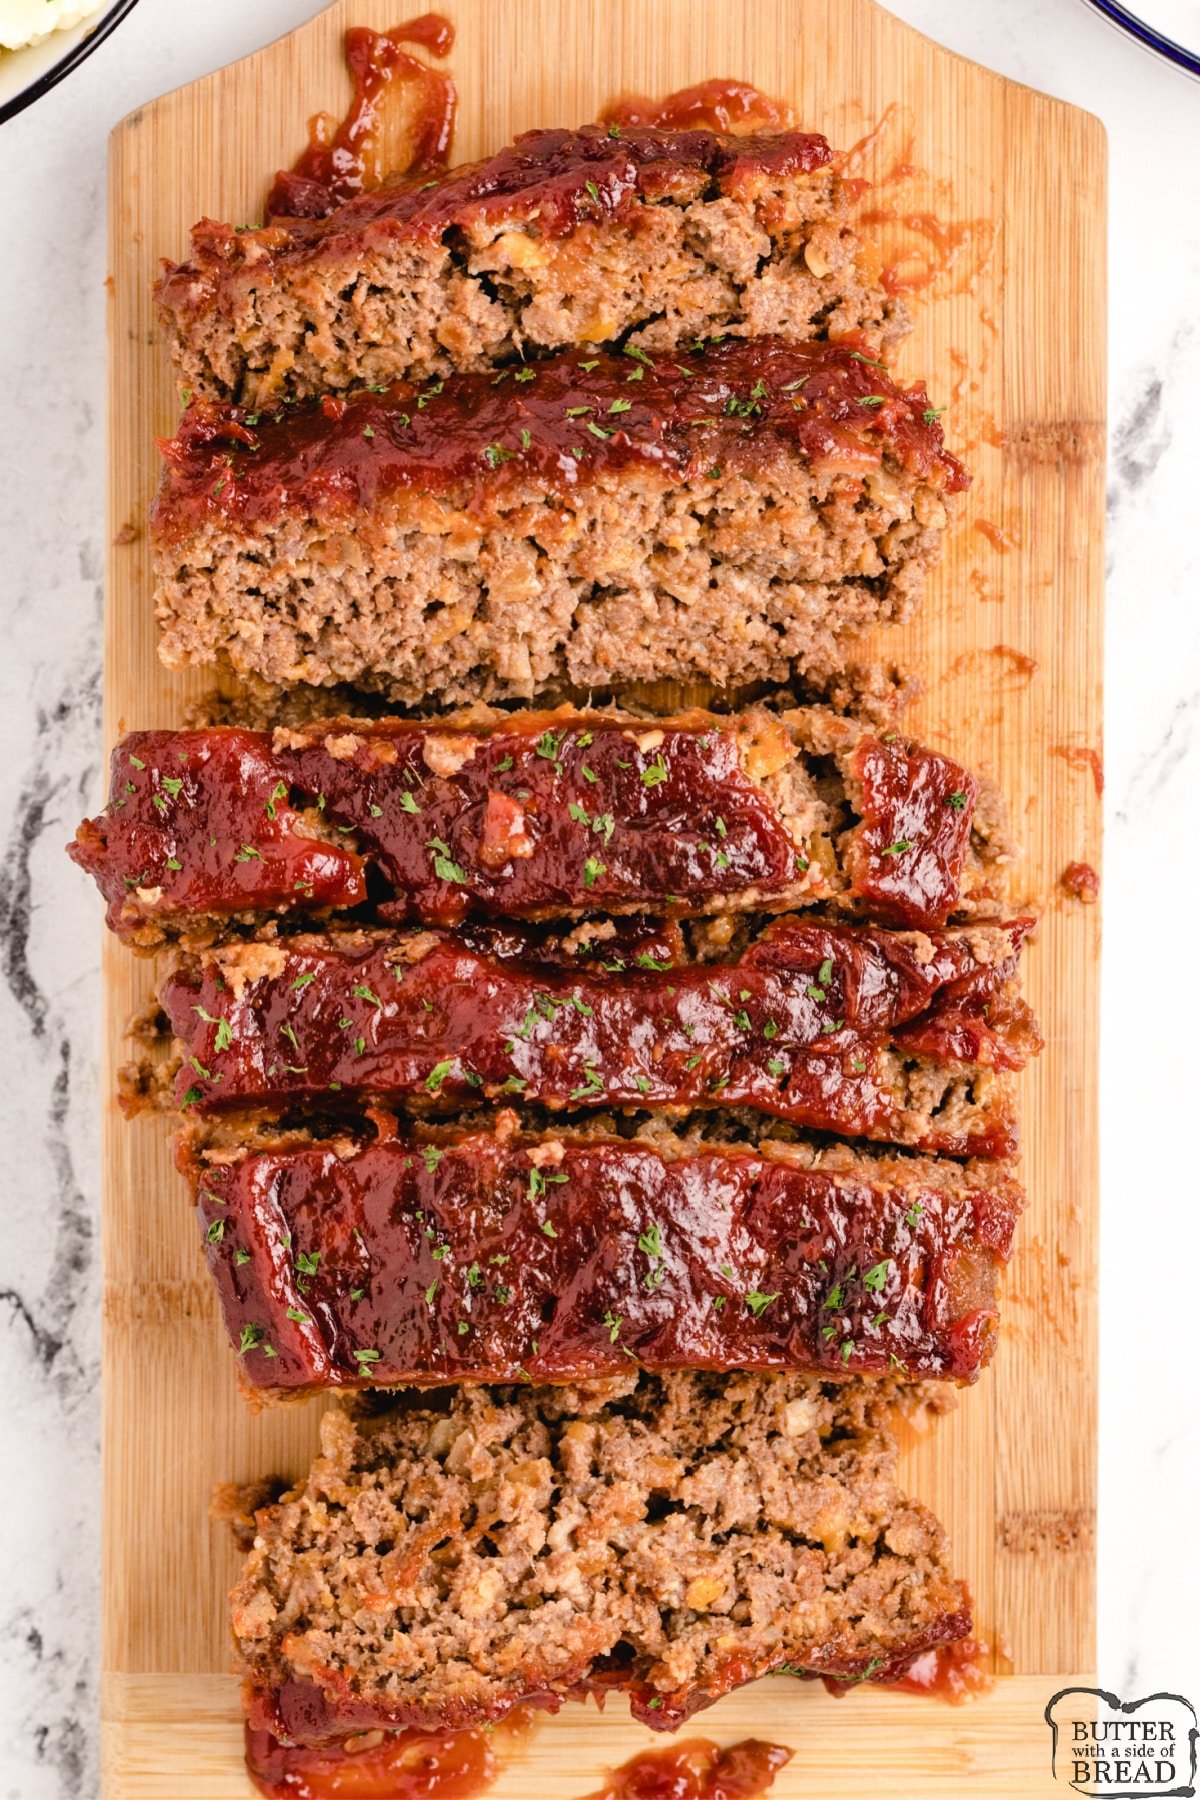 Ritz Cracker Meatloaf is the best meatloaf you'll ever try! Simple meatloaf recipe that is made with crushed Ritz crackers, cheddar cheese and onion soup mix and has so much flavor!